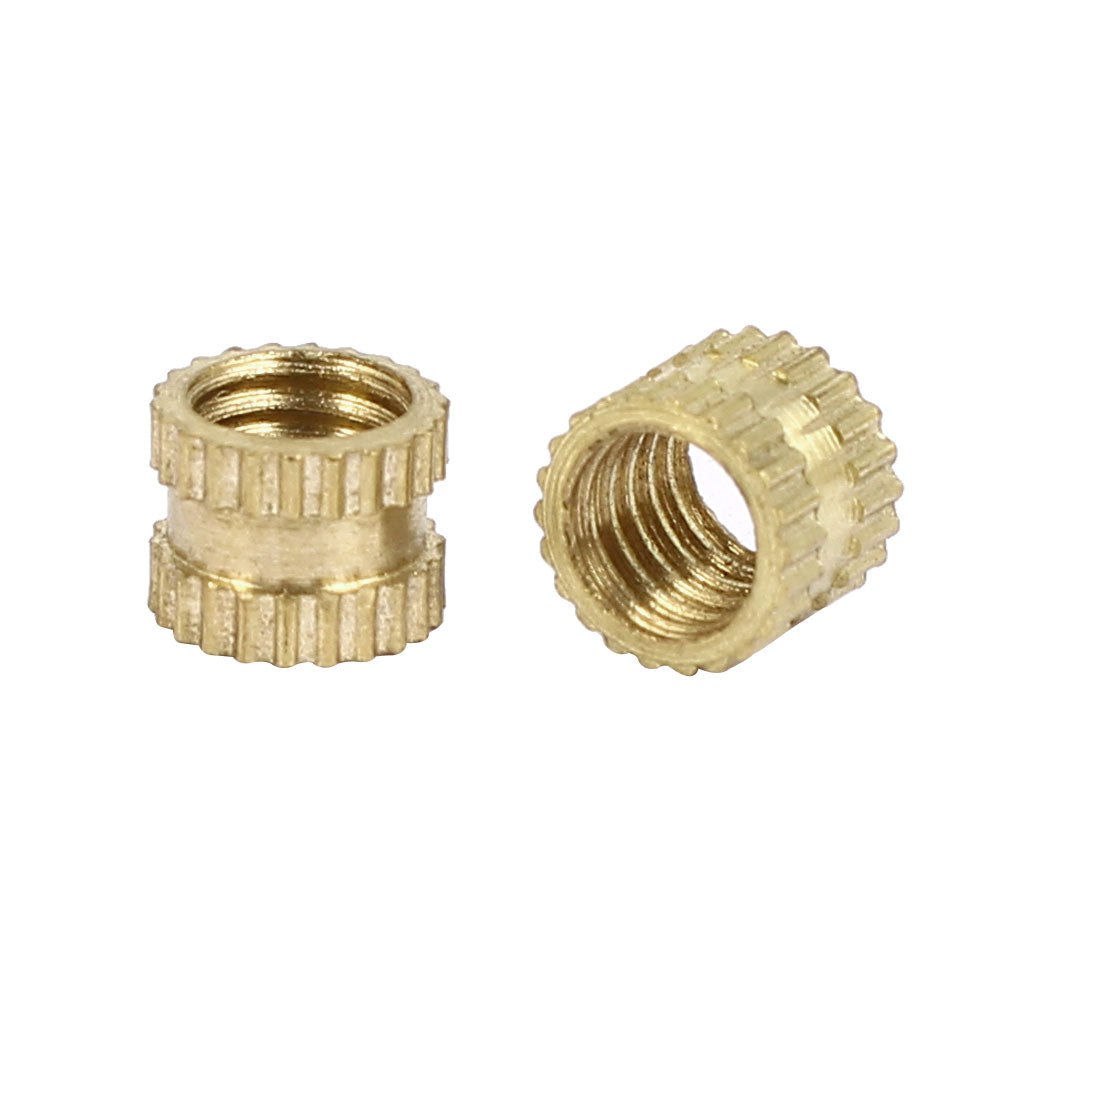 uxcell Uxcell M5 x 5mm 0.8mm Pitch Brass Knurled Threaded Round Insert Embedded Nuts 200PCS